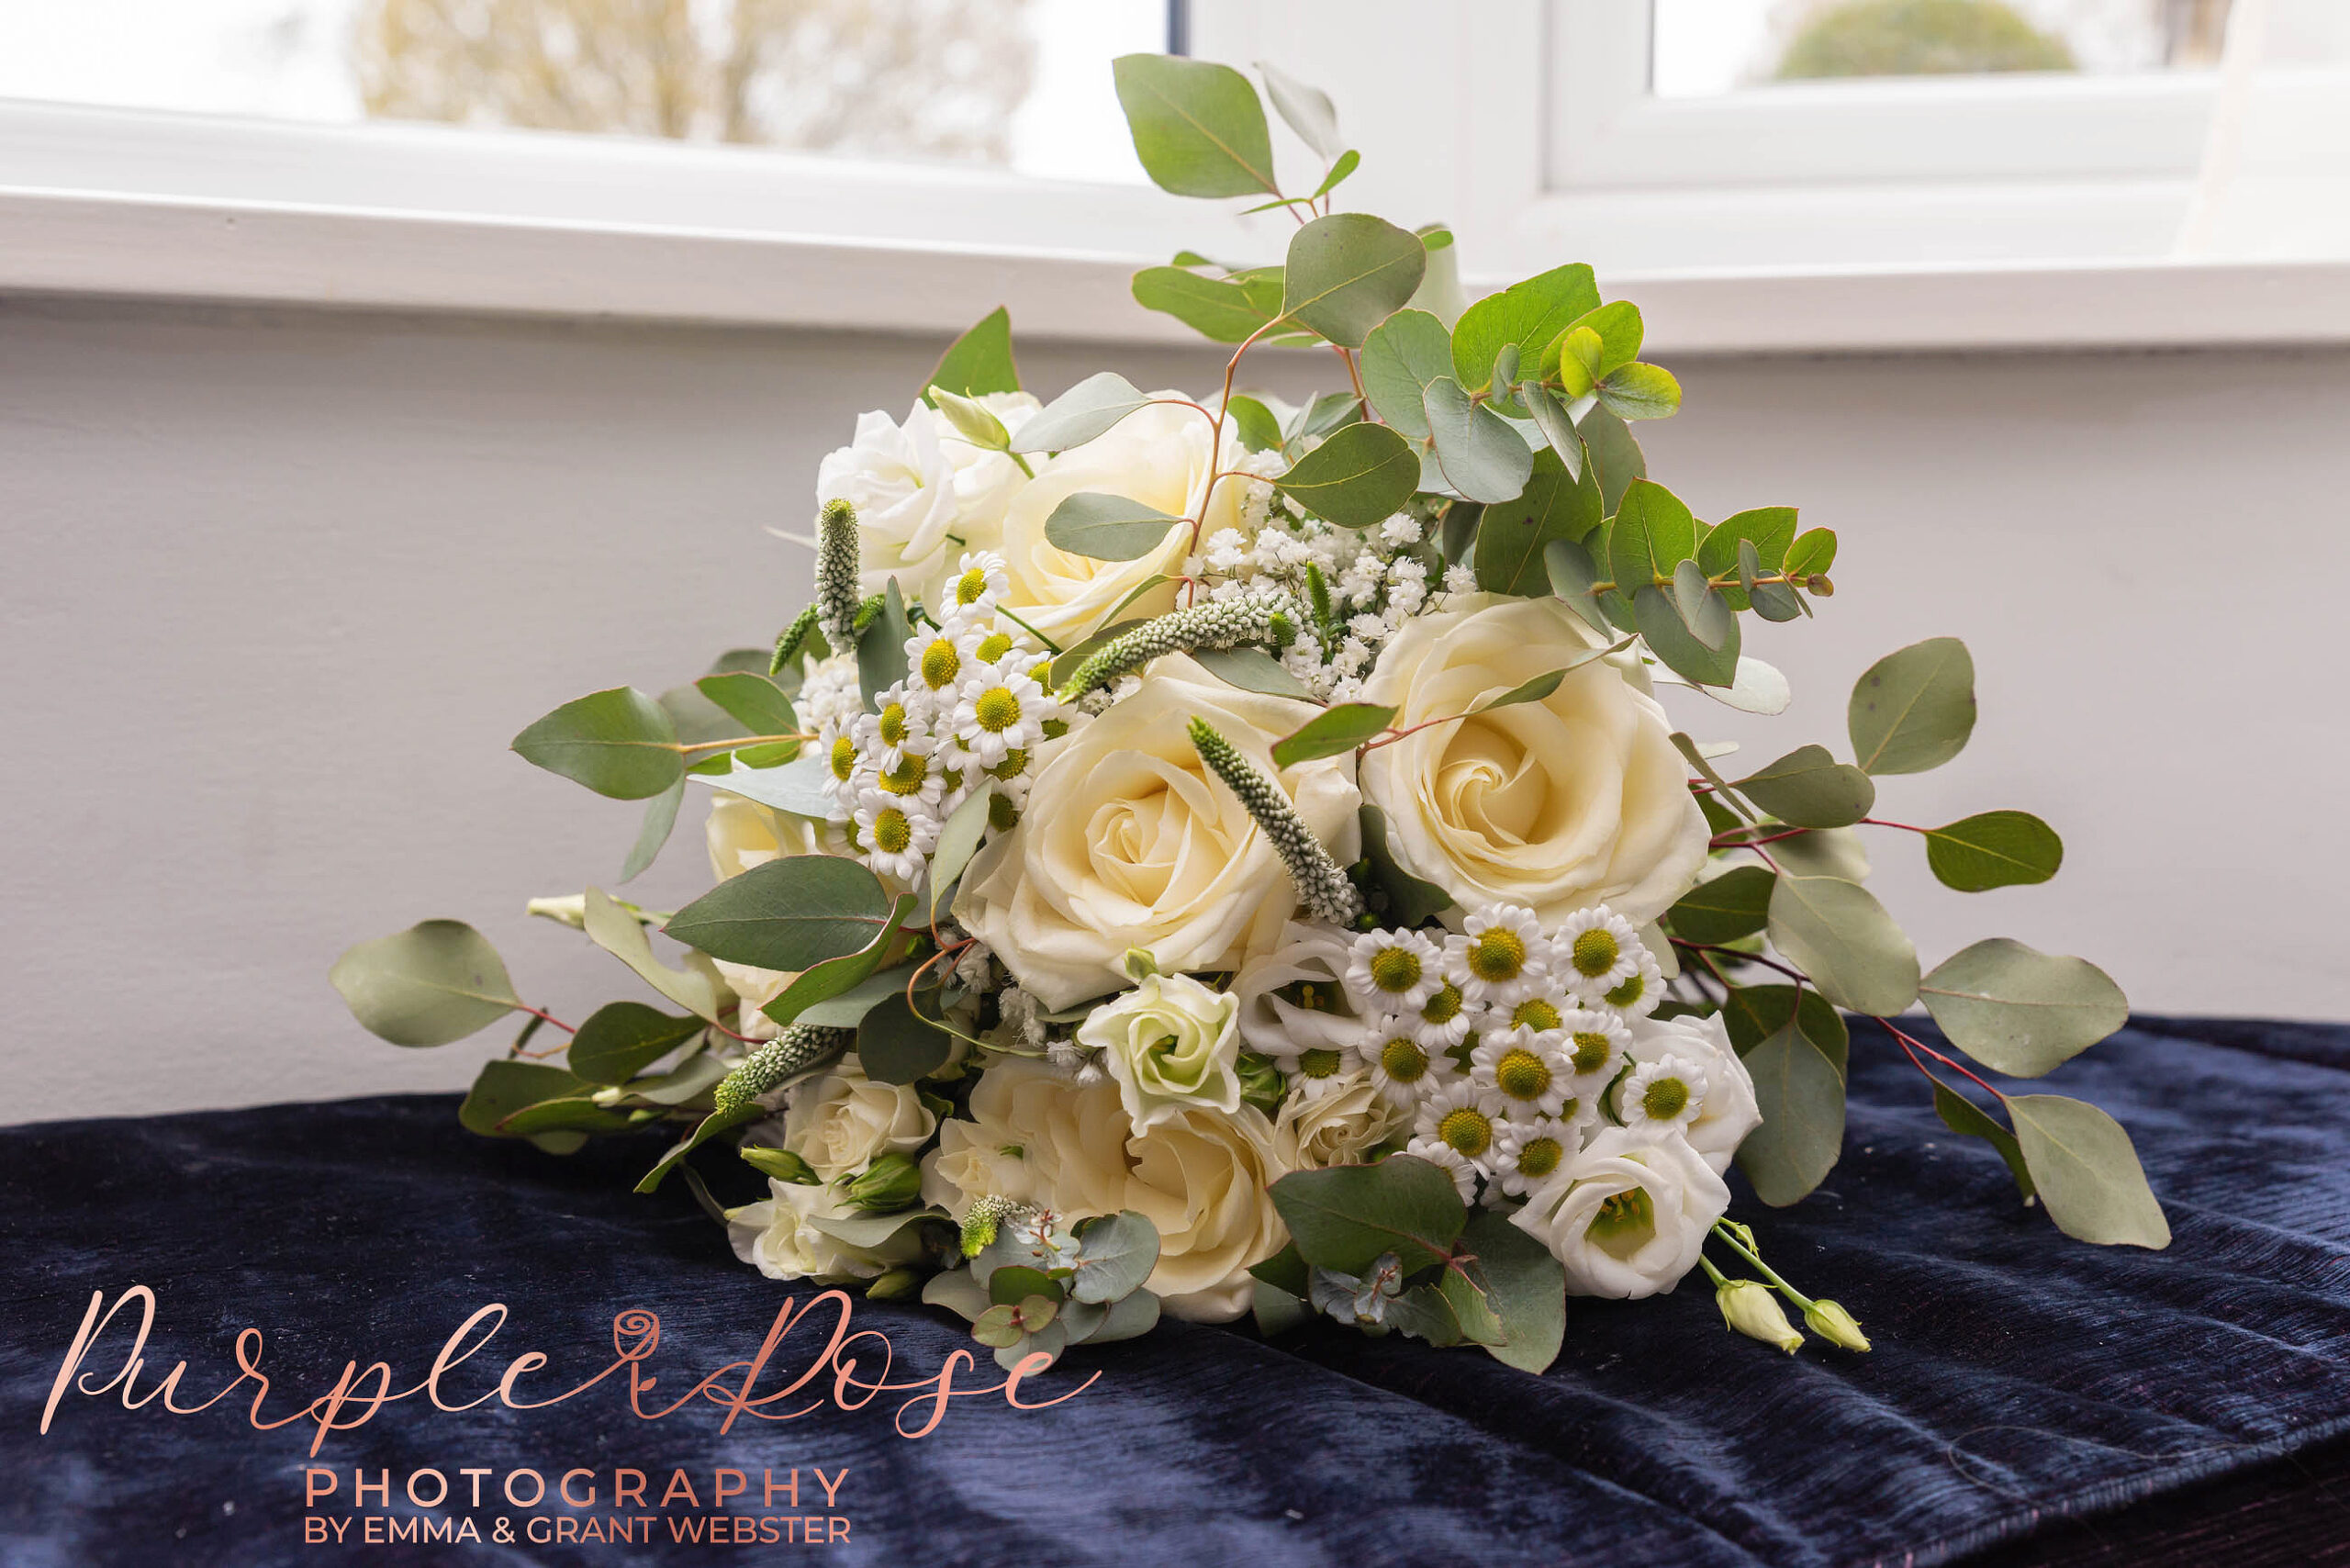 Photo of a brides bouquet by a window on her wedding day in Milton Keynes